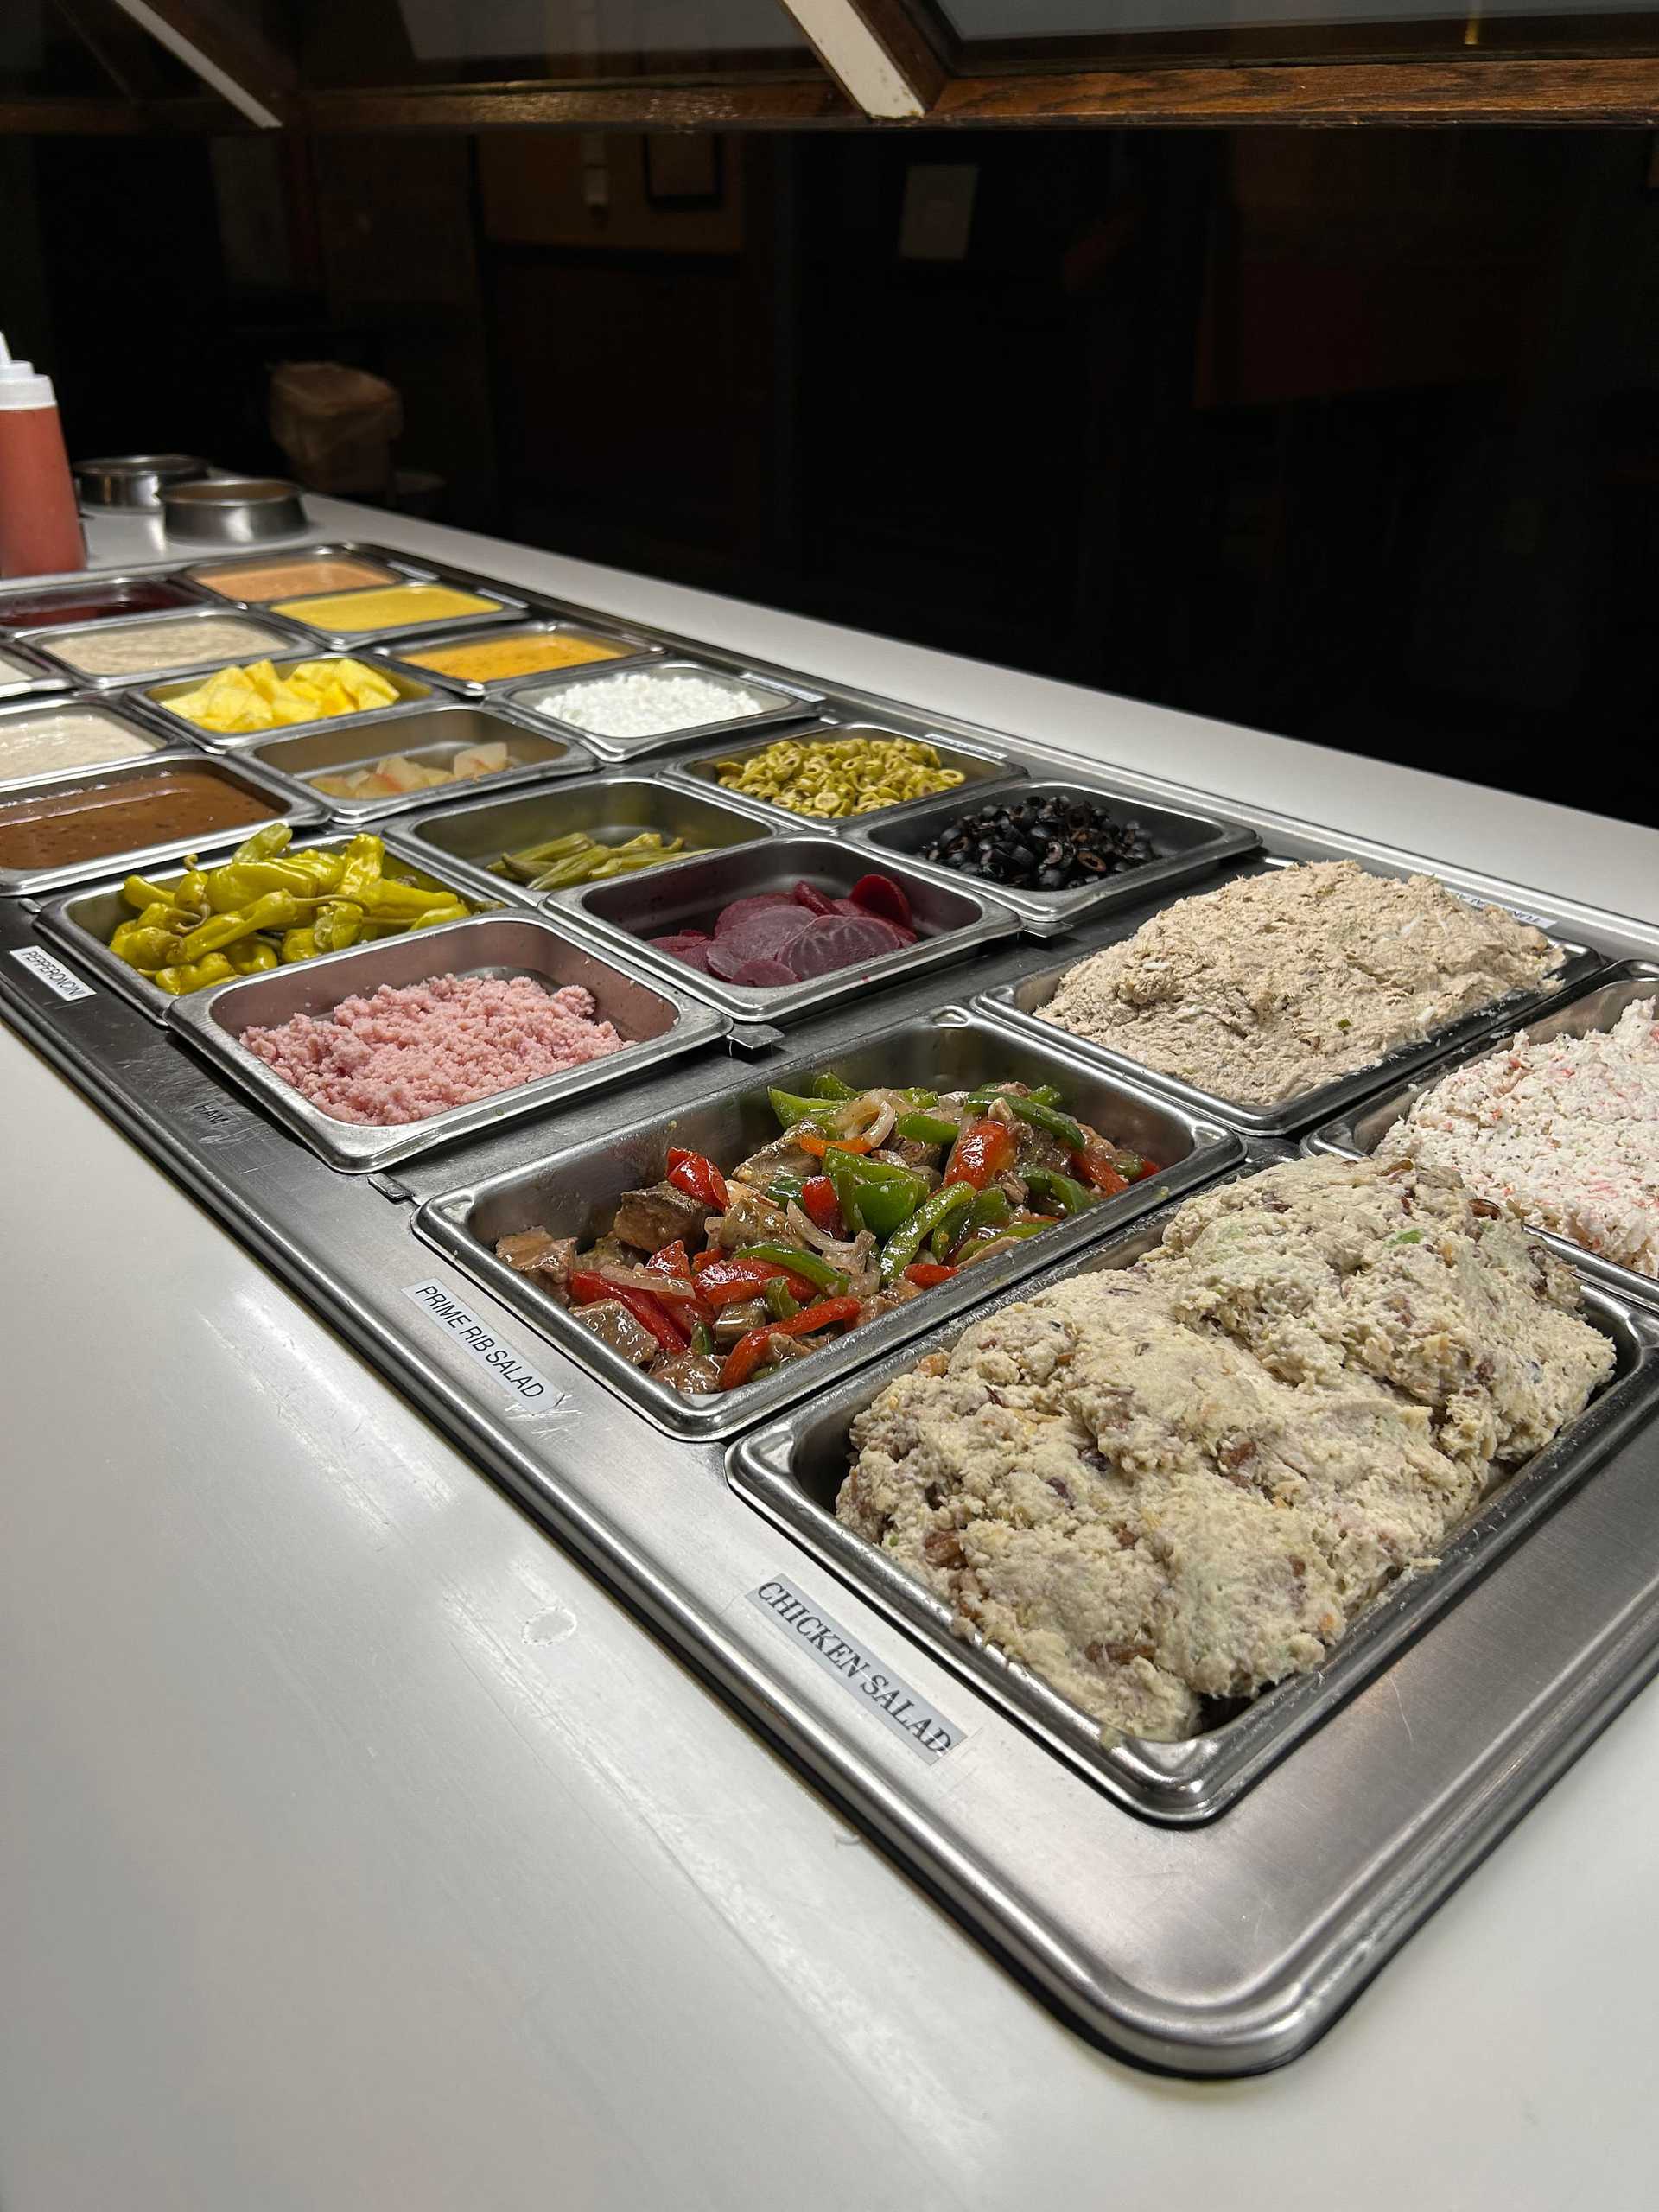 Self-serve salad bar with various fresh toppings in metal containers, including vegetables and meats.